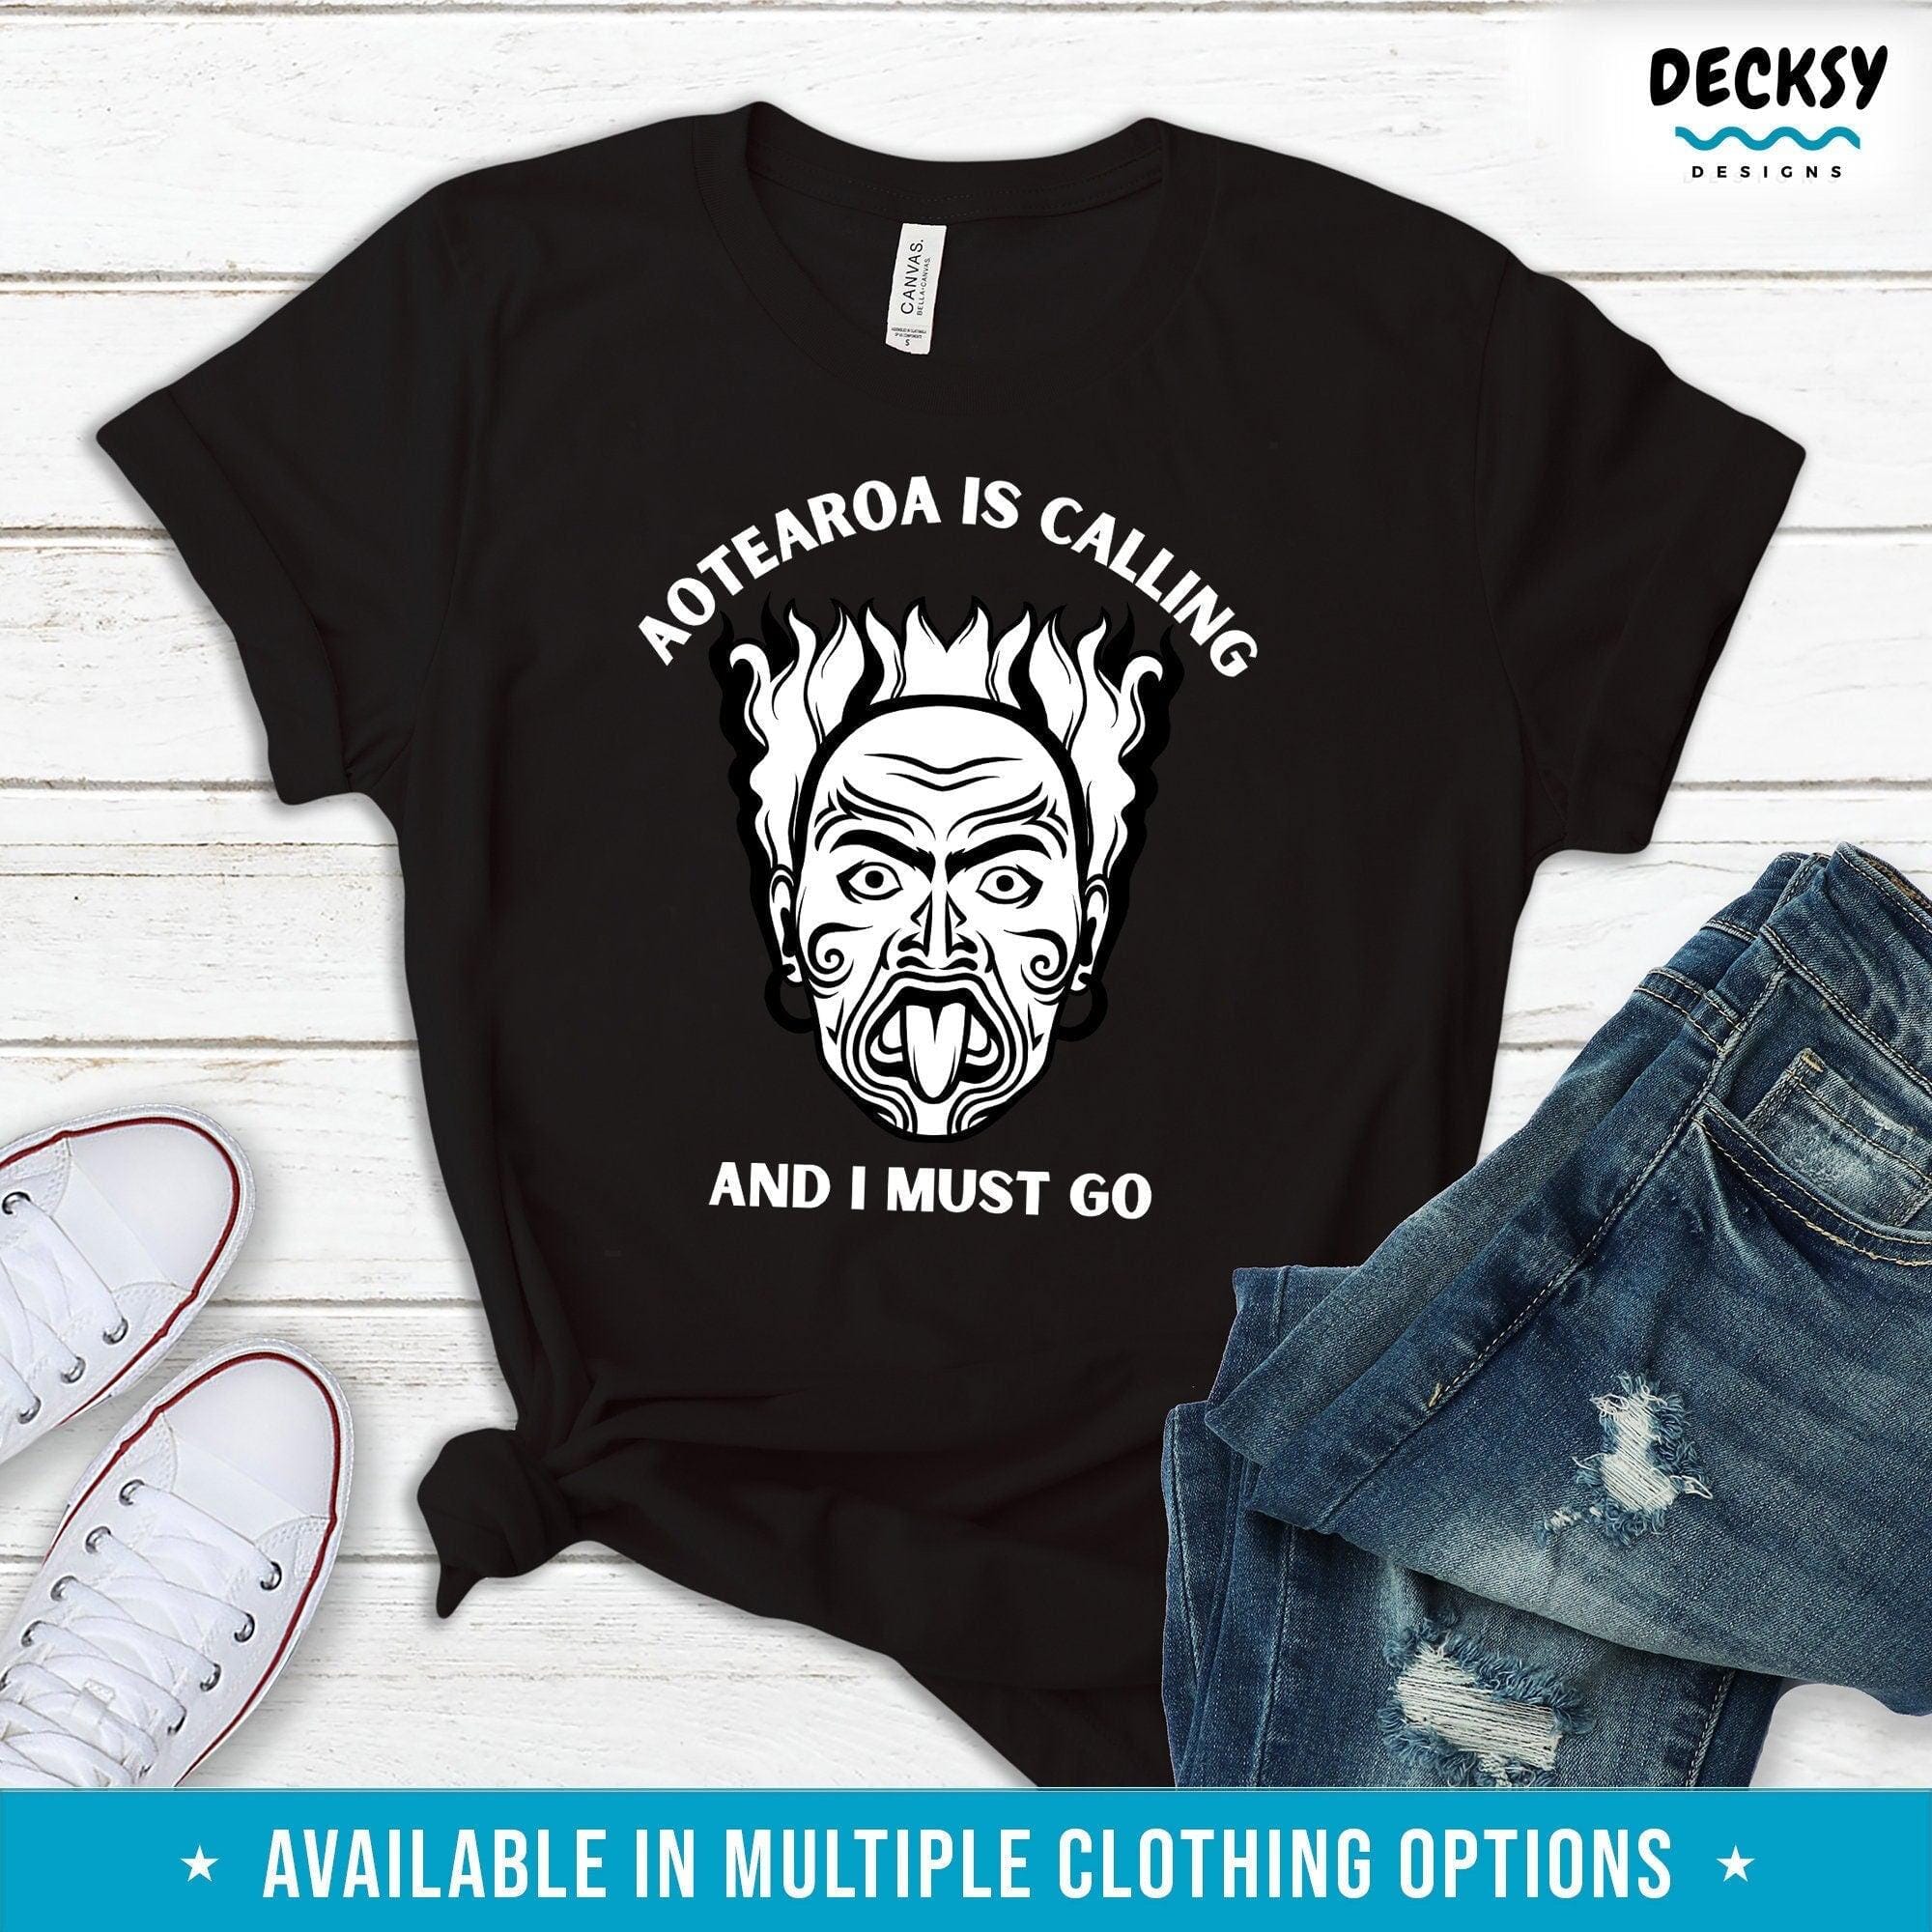 Aotearoa Is Calling And I Must Go T-shirt, New Zealand Friend Gift-Clothing:Gender-Neutral Adult Clothing:Tops & Tees:T-shirts:Graphic Tees-DecksyDesigns